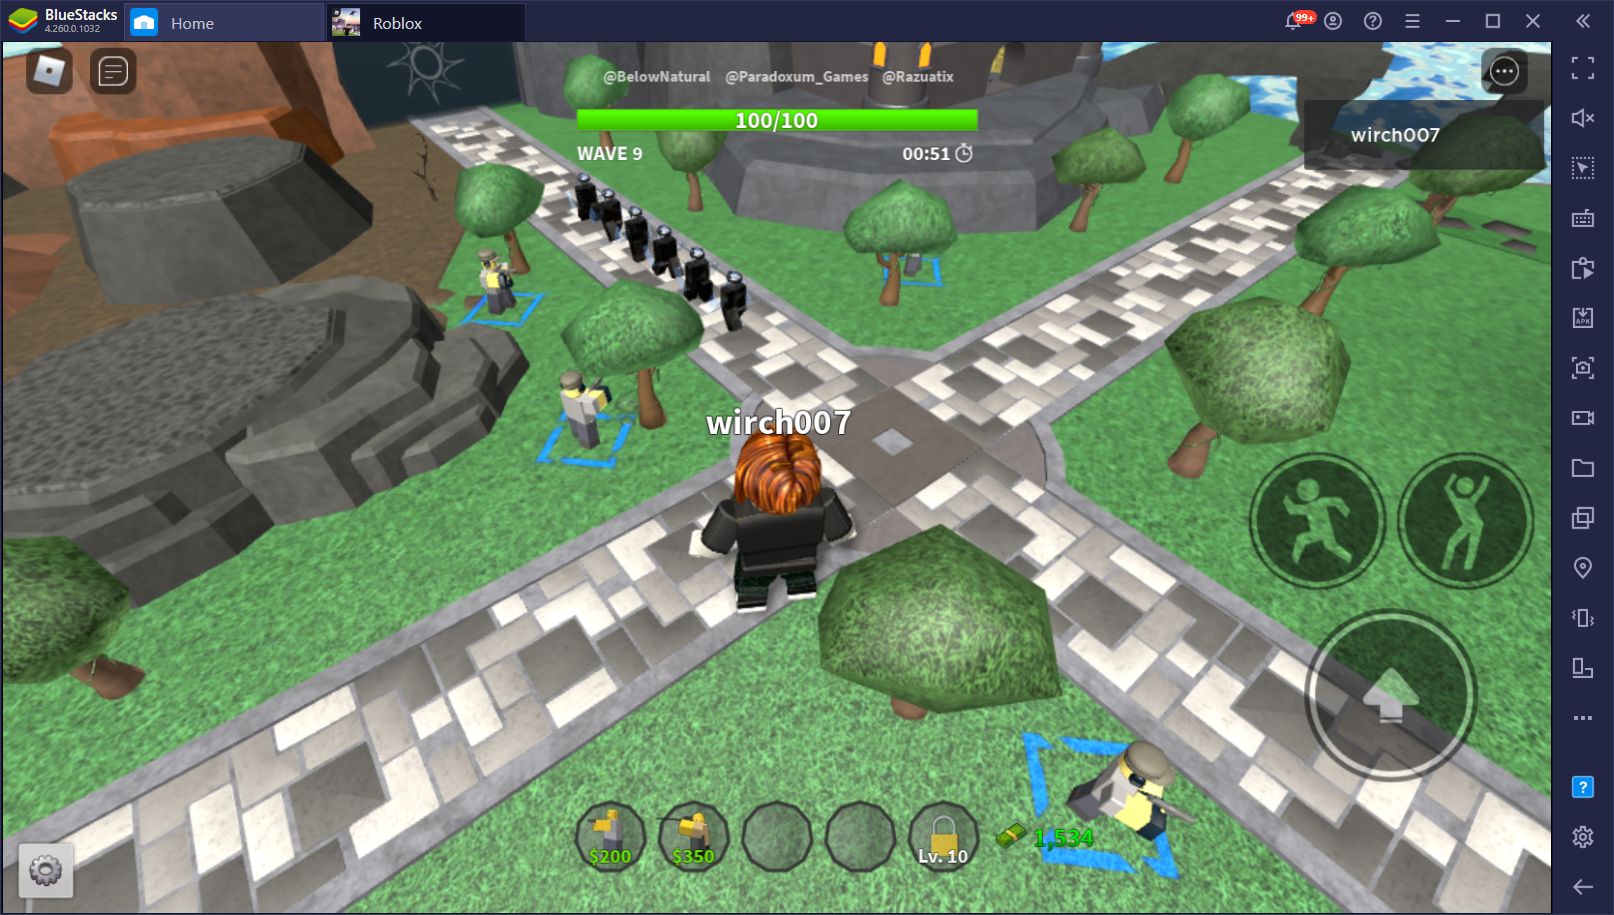 The Best Roblox Games To Play In 2021 Bluestacks - list of the best roblox games